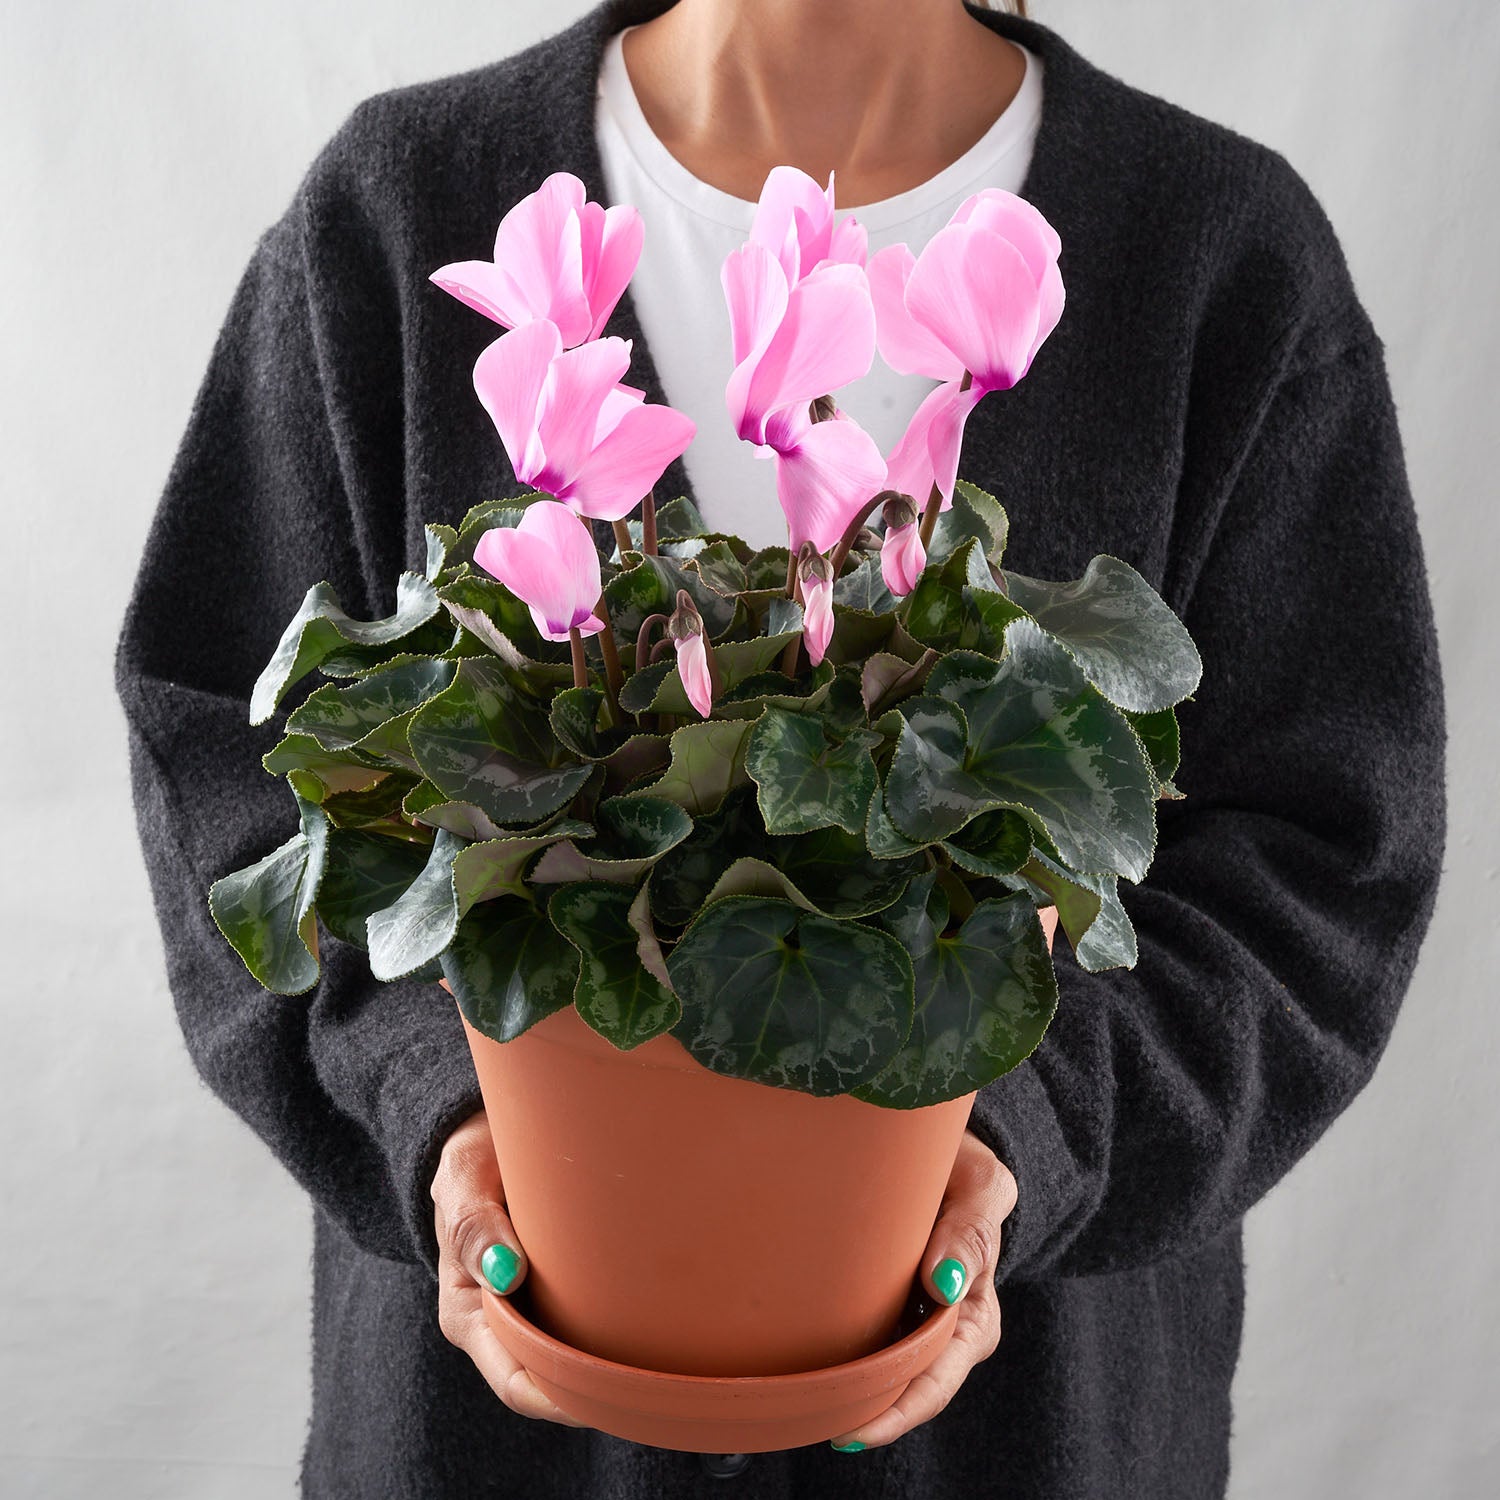 Woman holding pale pink cyclamen plant in clay pot.